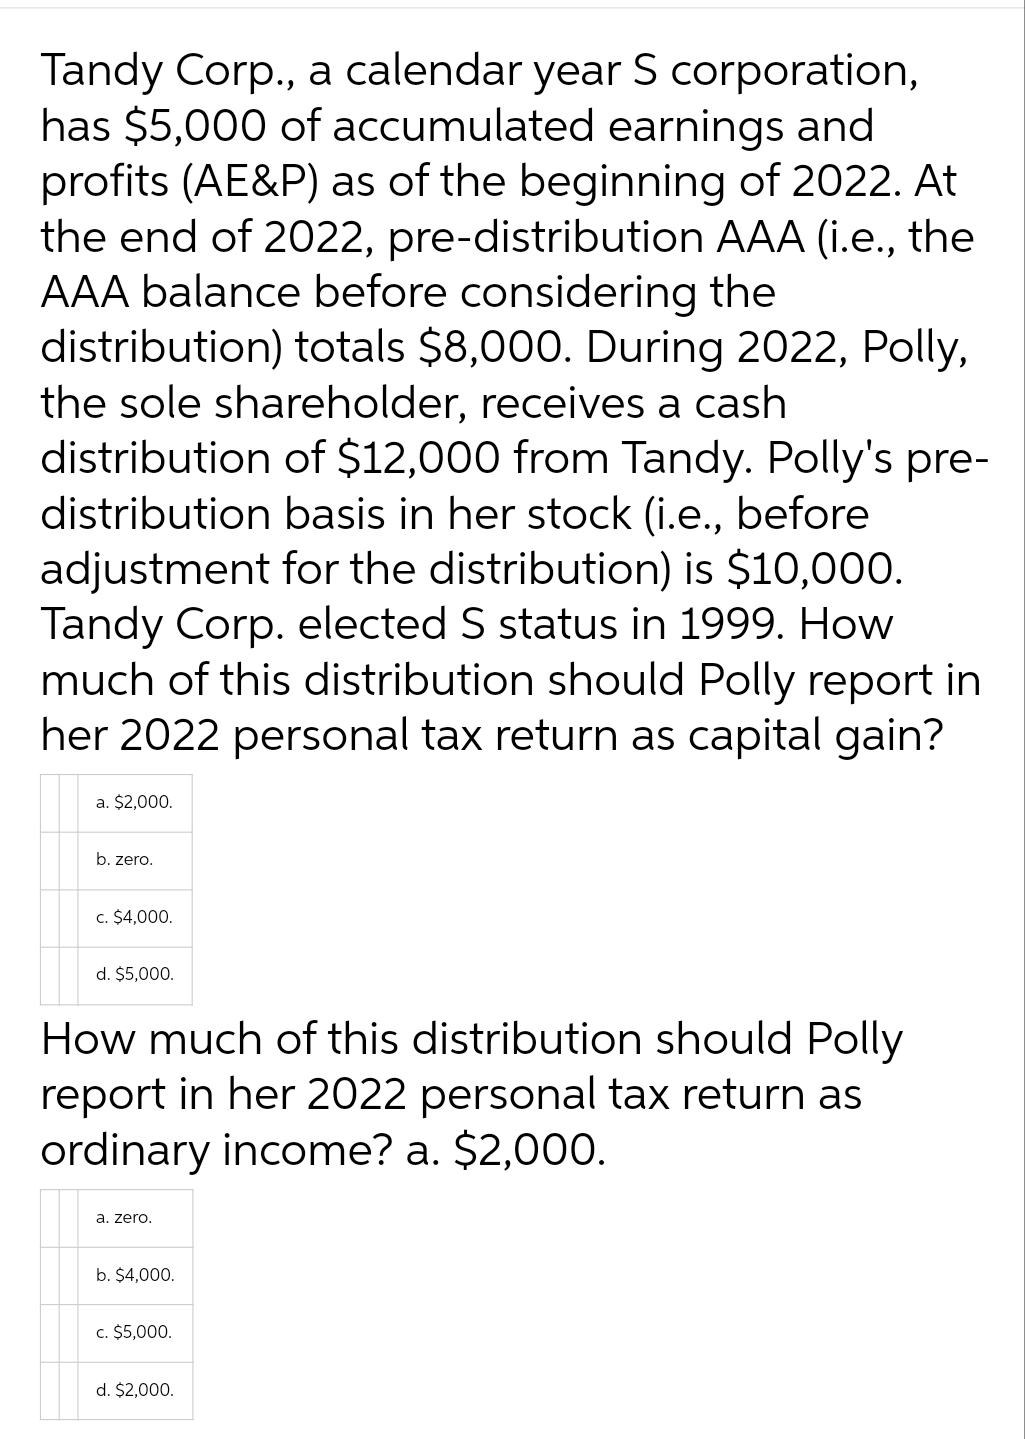 Tandy Corp., a calendar year S corporation,
has $5,000 of accumulated earnings and
profits (AE&P) as of the beginning of 2022. At
the end of 2022, pre-distribution AAA (i.e., the
AAA balance before considering the
distribution) totals $8,000. During 2022, Polly,
the sole shareholder, receives a cash
distribution of $12,000 from Tandy. Polly's pre-
distribution basis in her stock (i.e., before
adjustment for the distribution) is $10,000.
Tandy Corp. elected S status in 1999. How
much of this distribution should Polly report in
her 2022 personal tax return as capital gain?
a. $2,000.
b. zero.
c. $4,000.
d. $5,000.
How much of this distribution should Polly
report in her 2022 personal tax return as
ordinary income? a. $2,000.
a. zero.
b. $4,000.
c. $5,000.
d. $2,000.